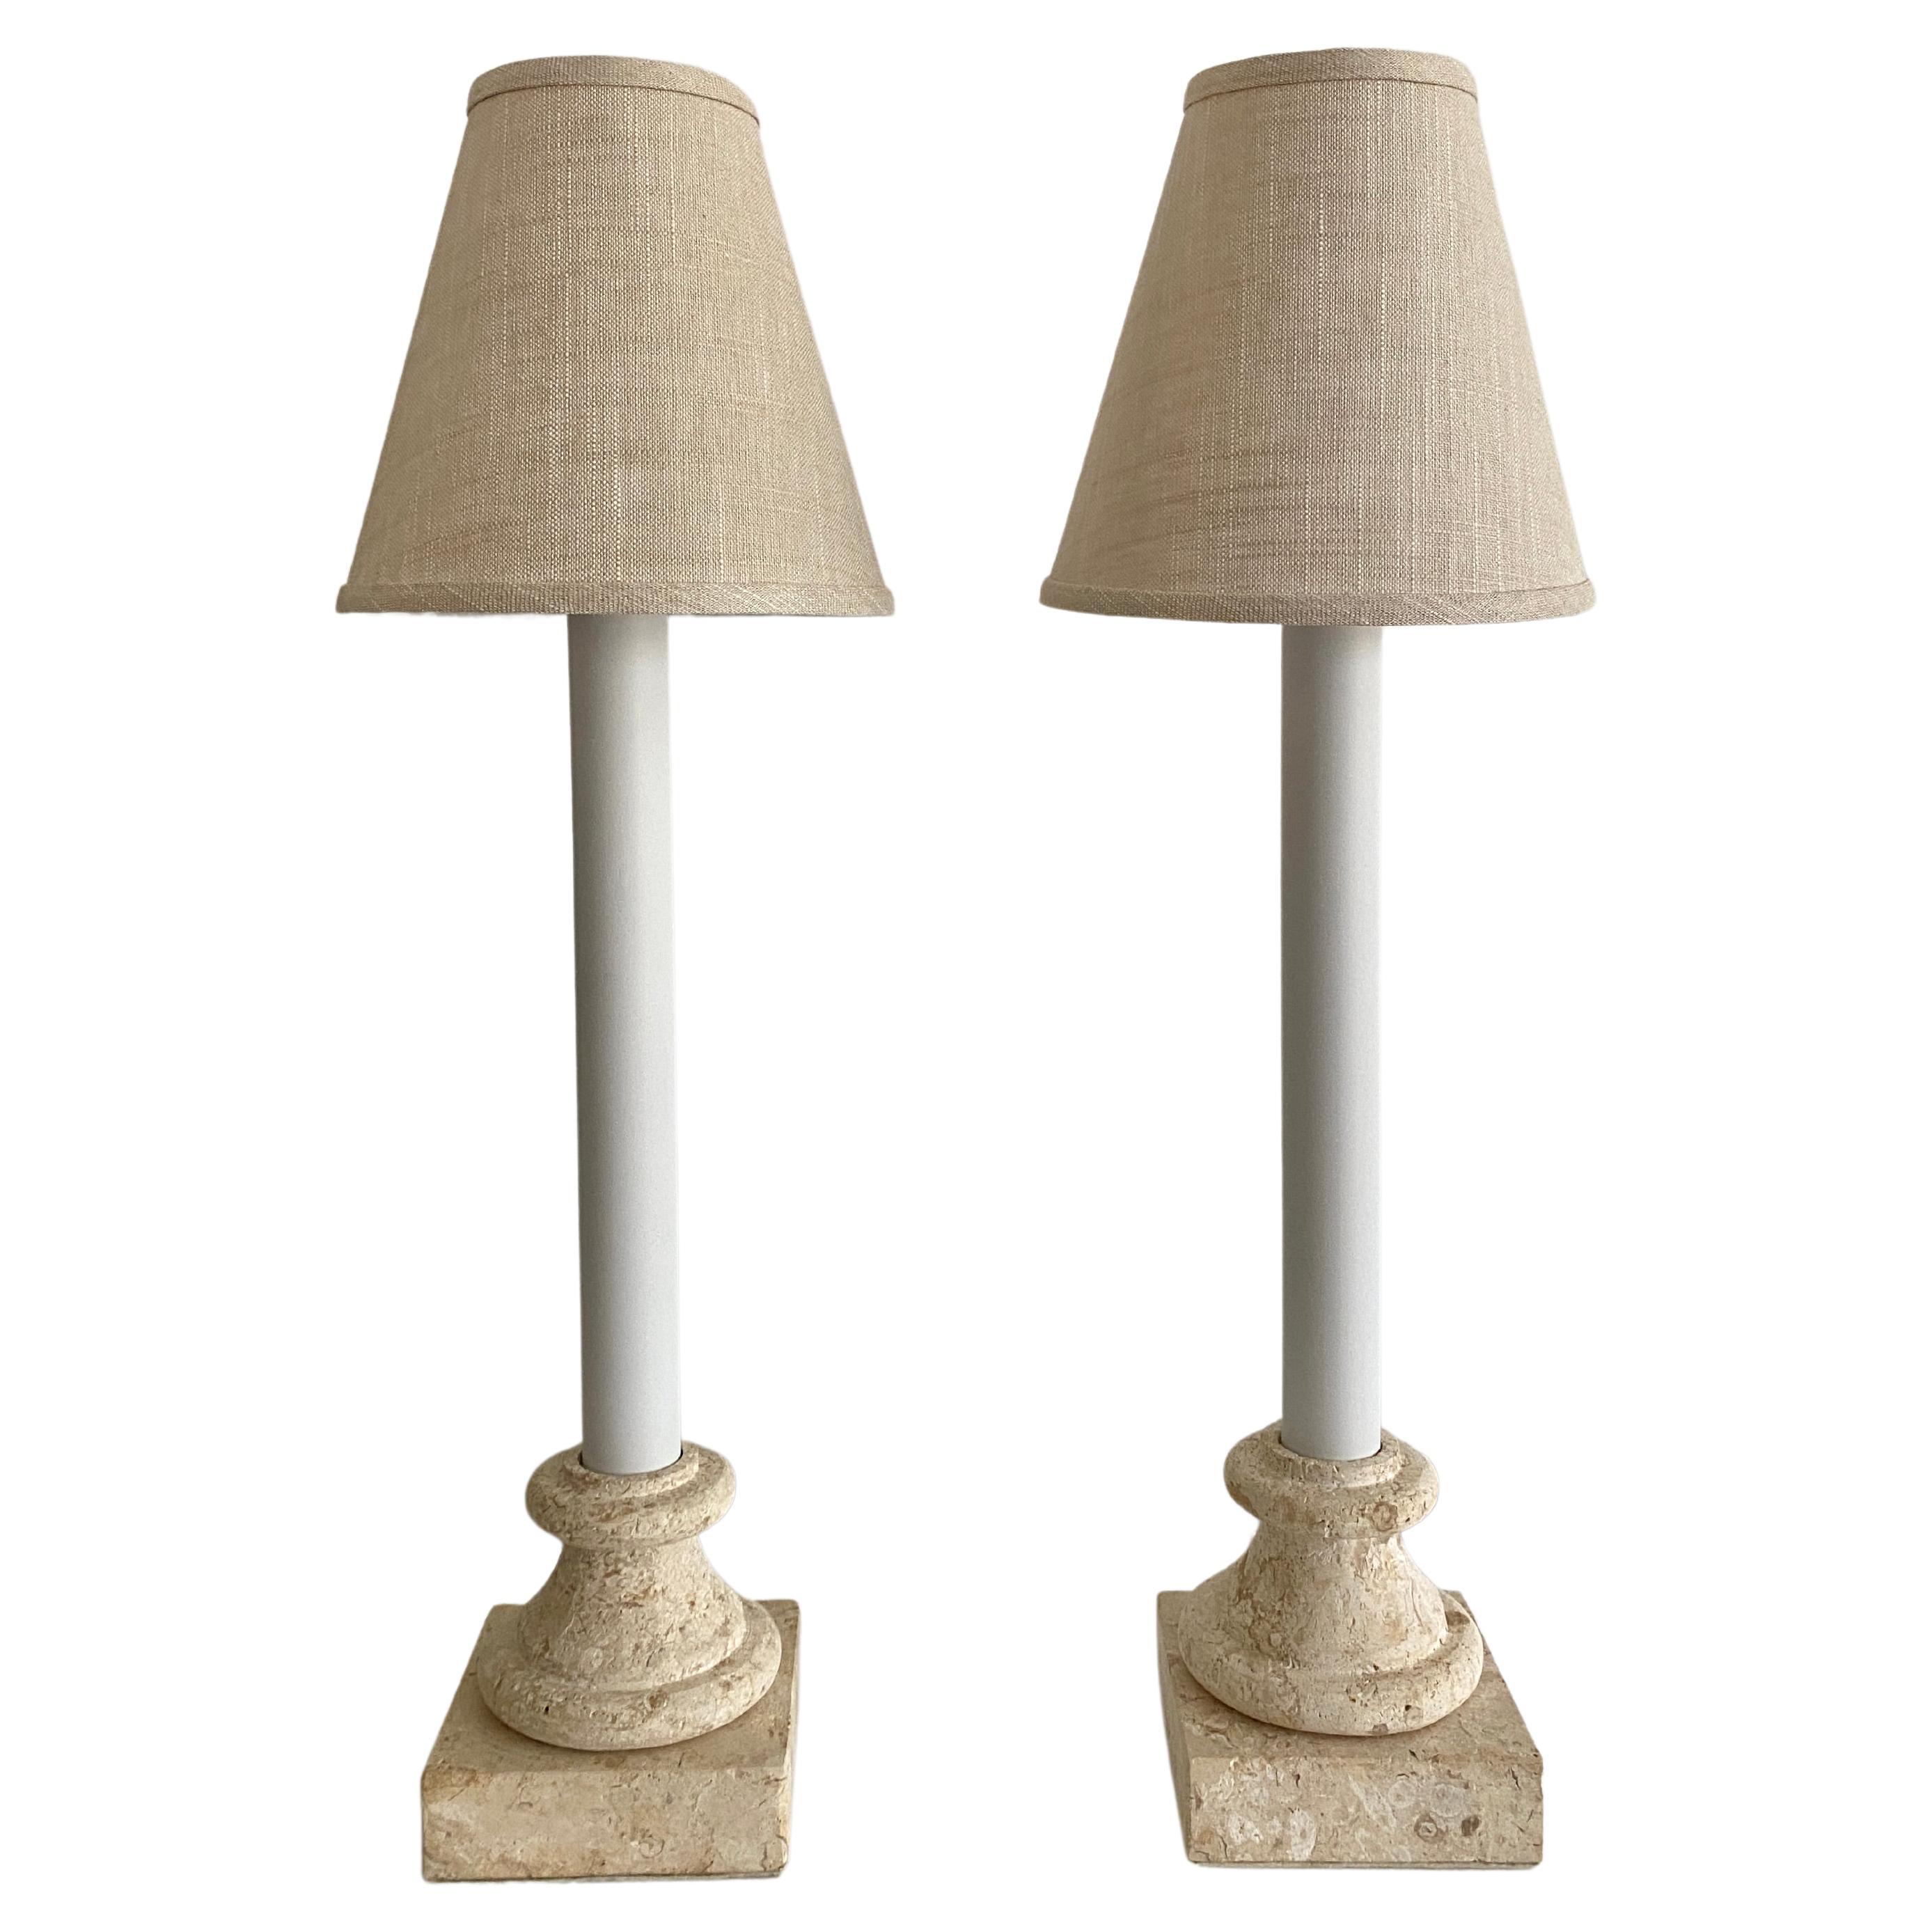 Two Vintage Beige Travertine Lamps with Linen Shades For Sale